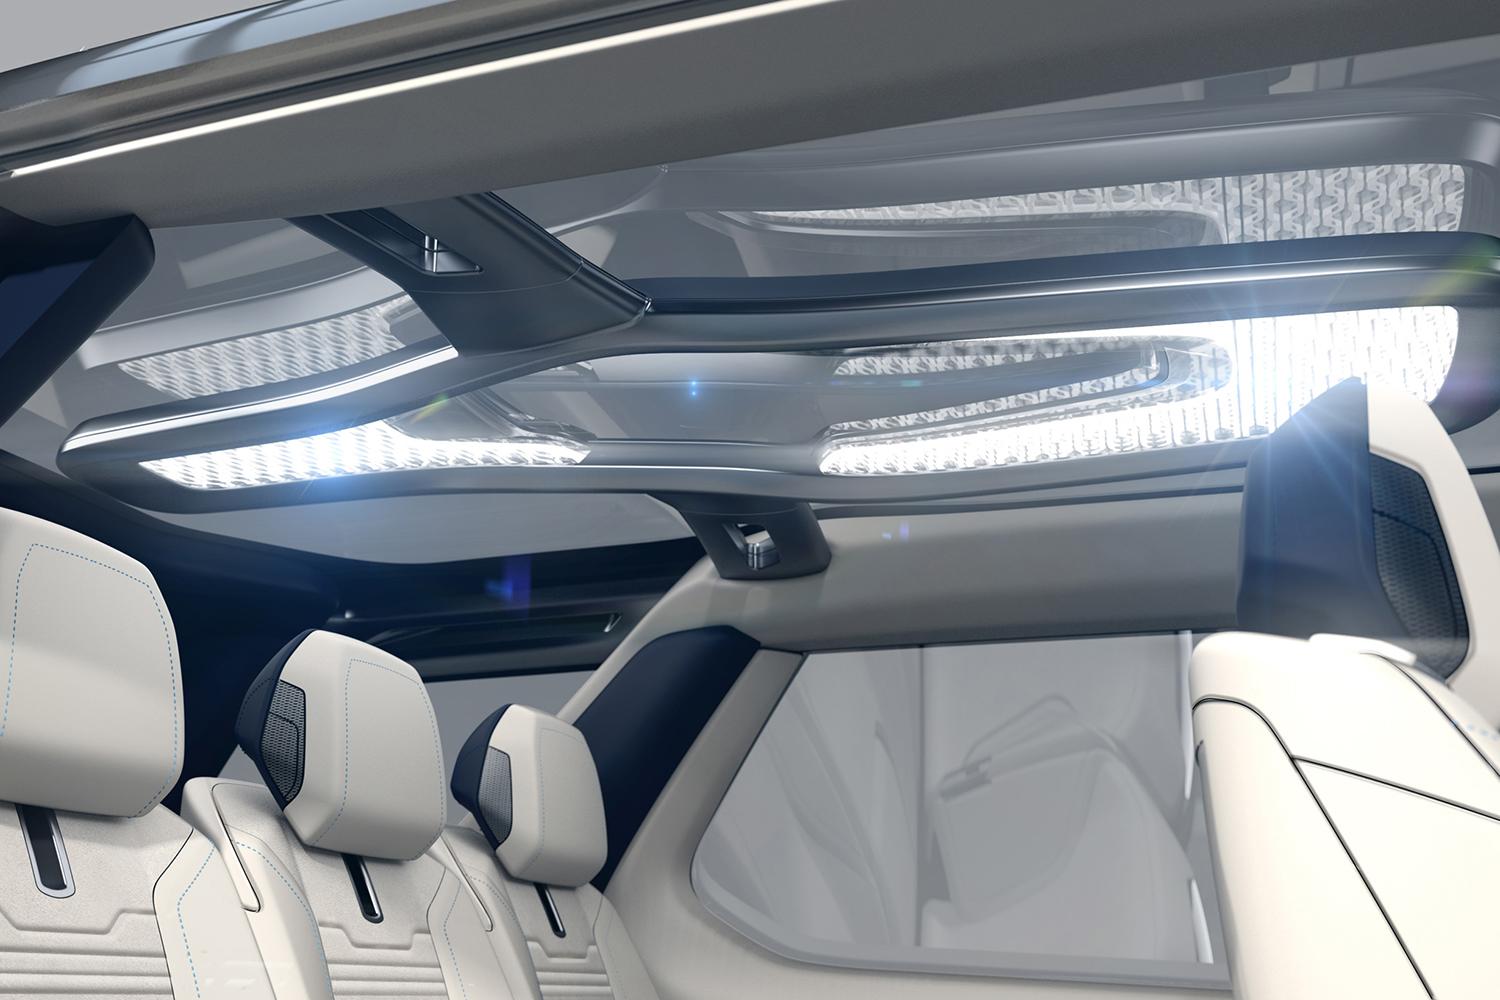 Land Rover’s Discovery Vision Concept